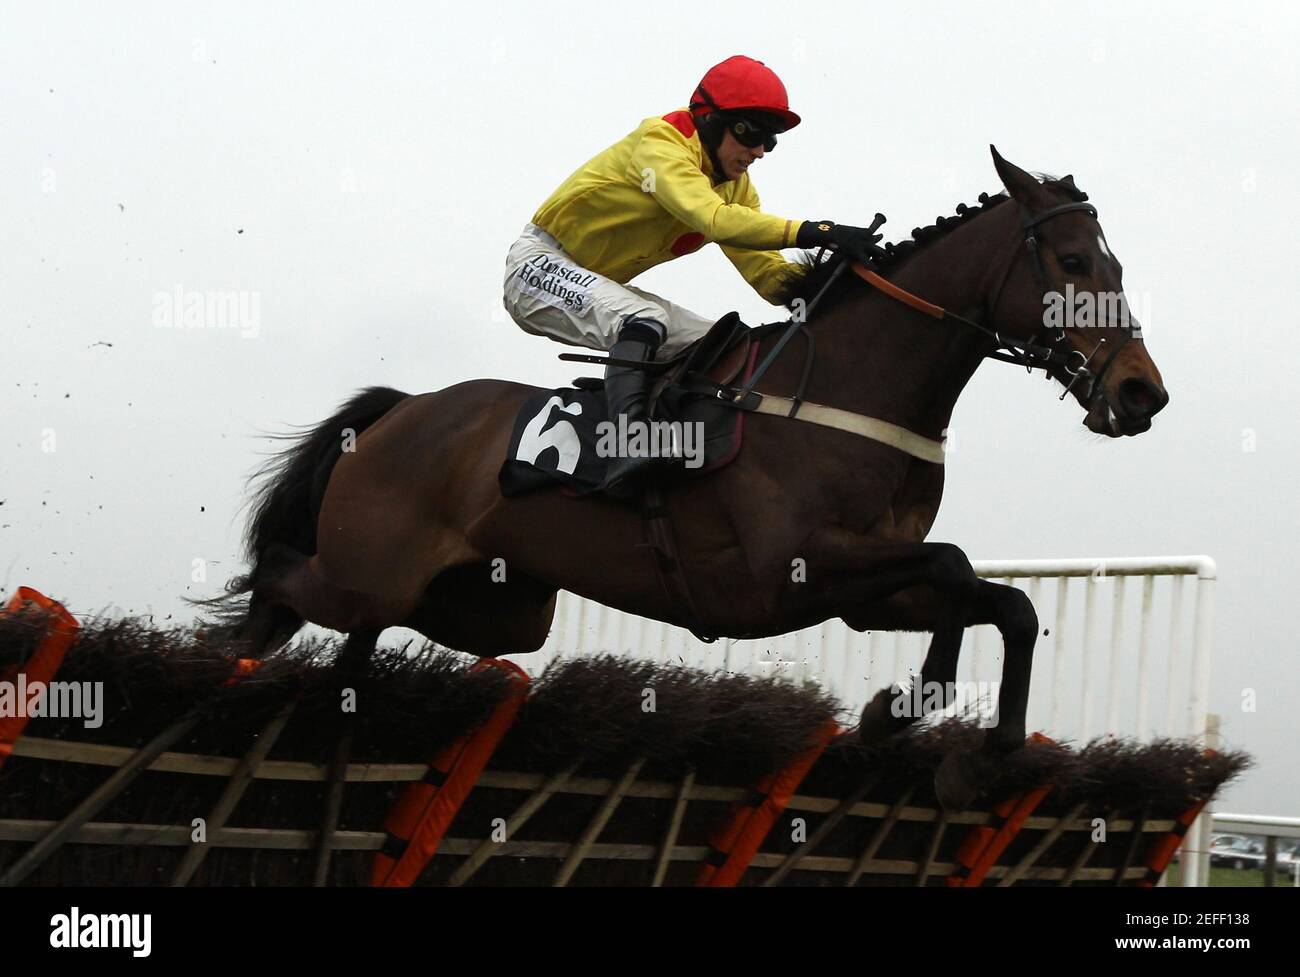 Horse Racing - Plumpton - Plumpton Racecourse - 28/2/11  Beau Lake ridden by Paddy Brennan clears the last flight before going on to win the 15.20 The MCR Print Handicap Hurdle Race  Mandatory Credit: Action Images / Julian Herbert  Livepic Stock Photo